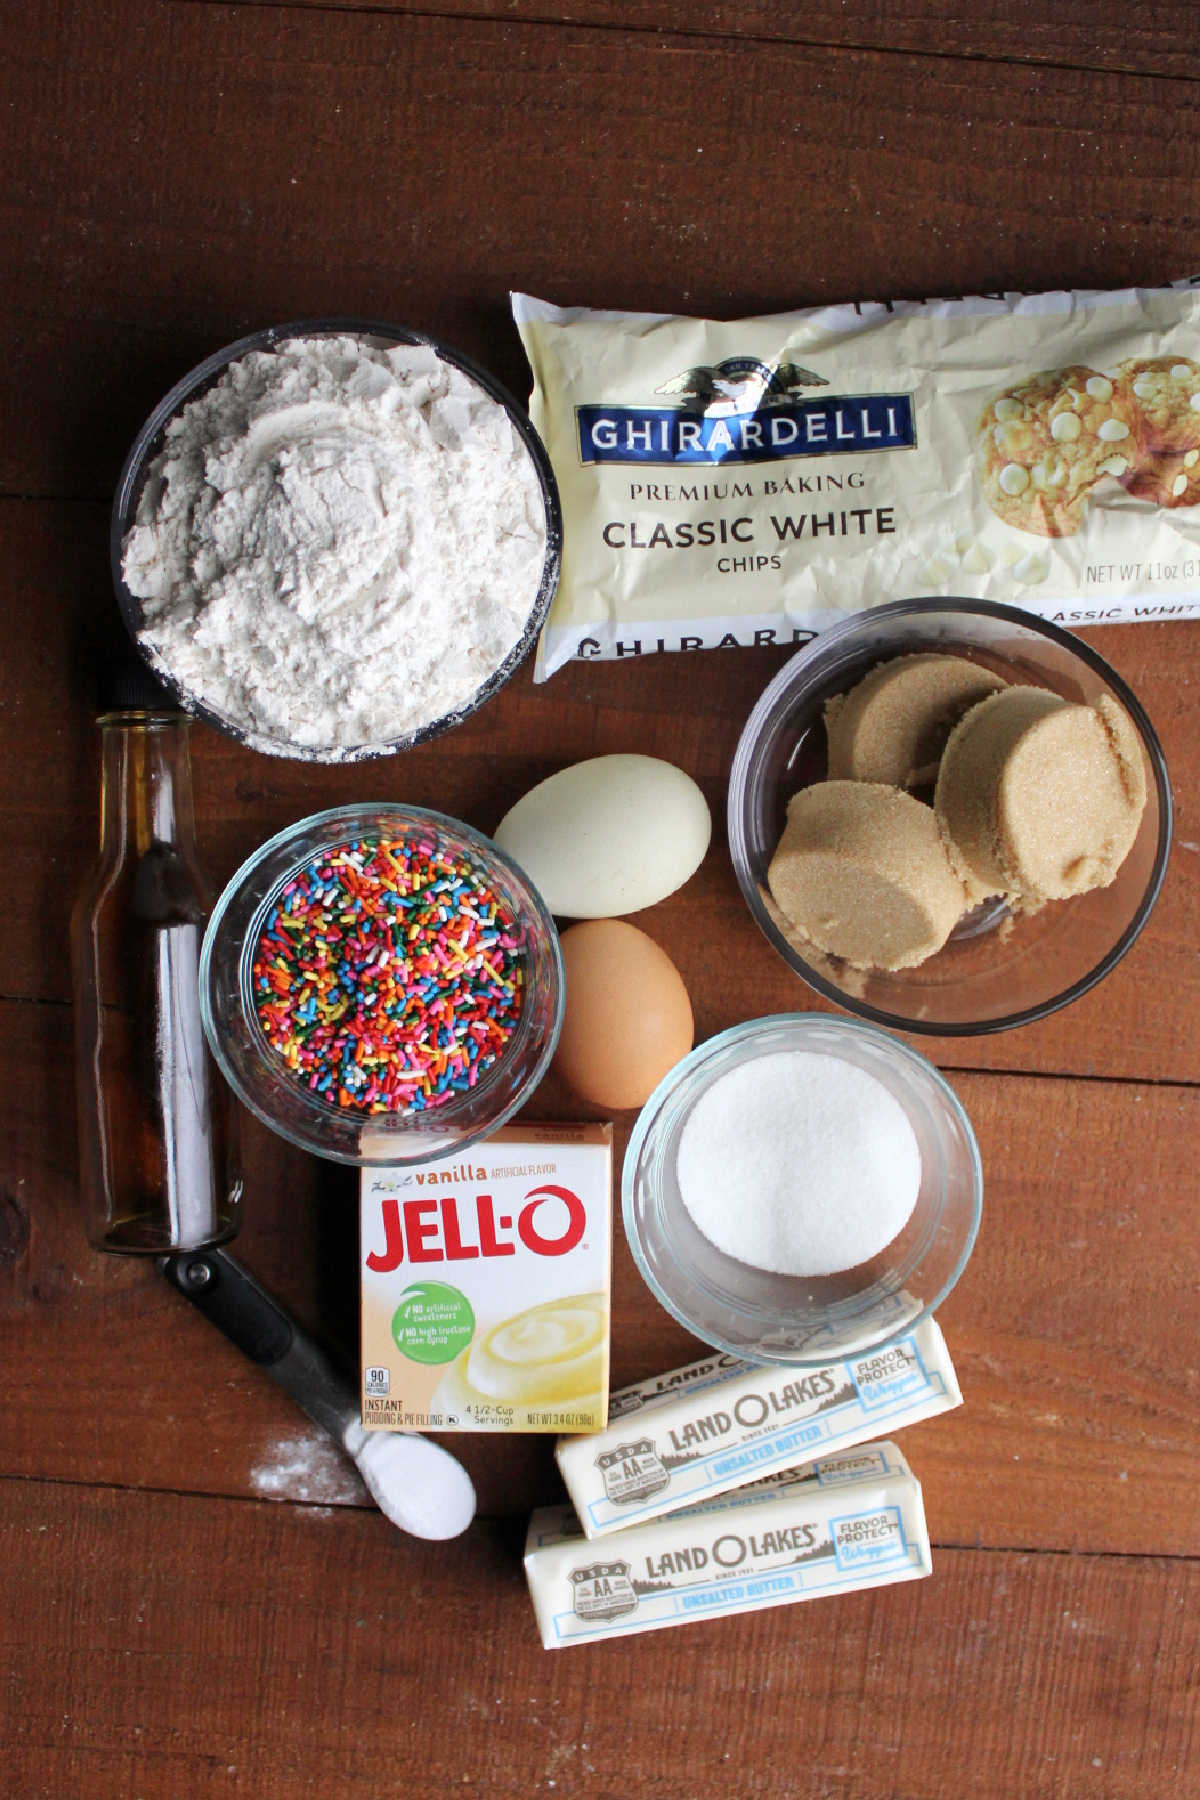 Ingredients for funfetti birthday cookies including butter, sugar, brown sugar, eggs, pudding mix, baking soda, flour, vanilla, sprinkles, and white chocolate chips.